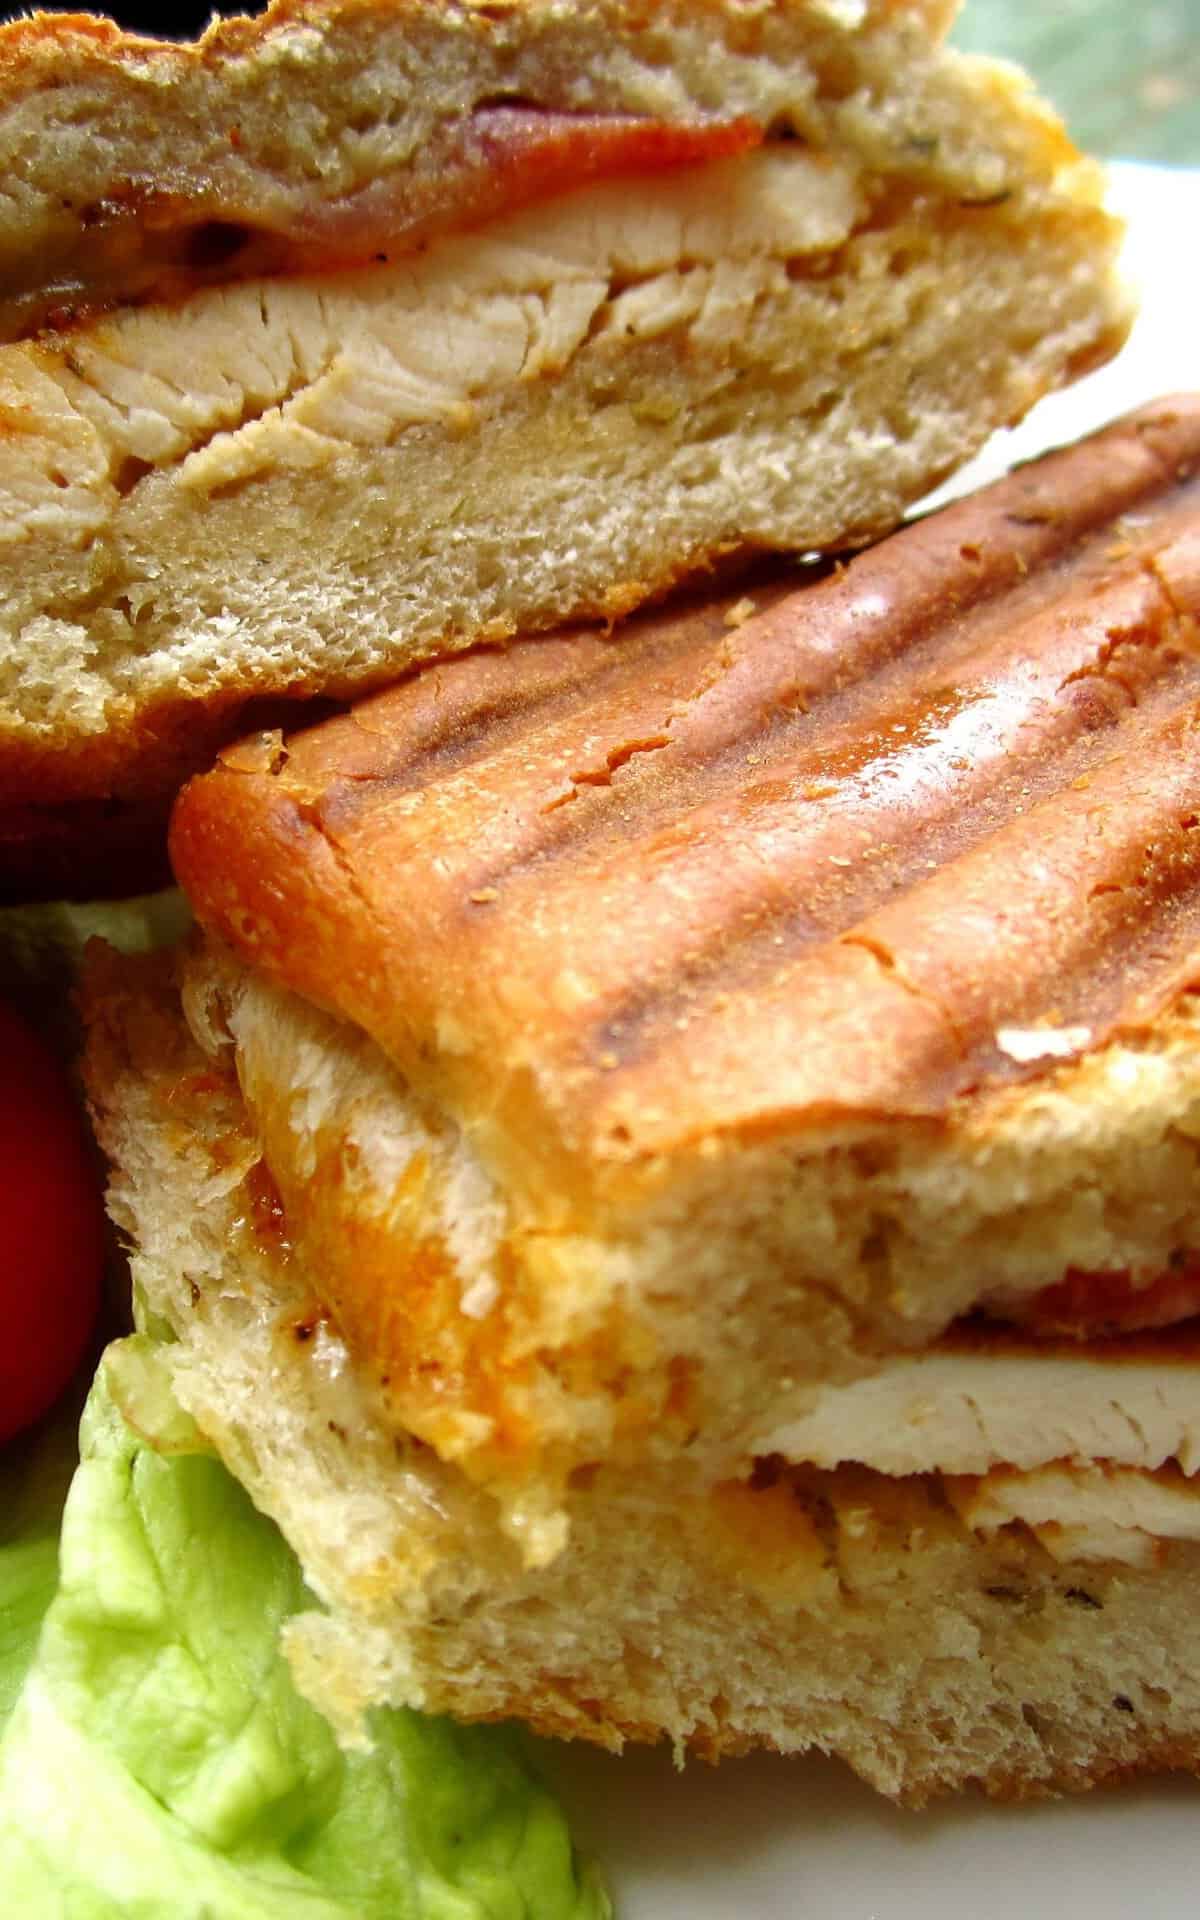  The ultimate comfort food in sandwich form!